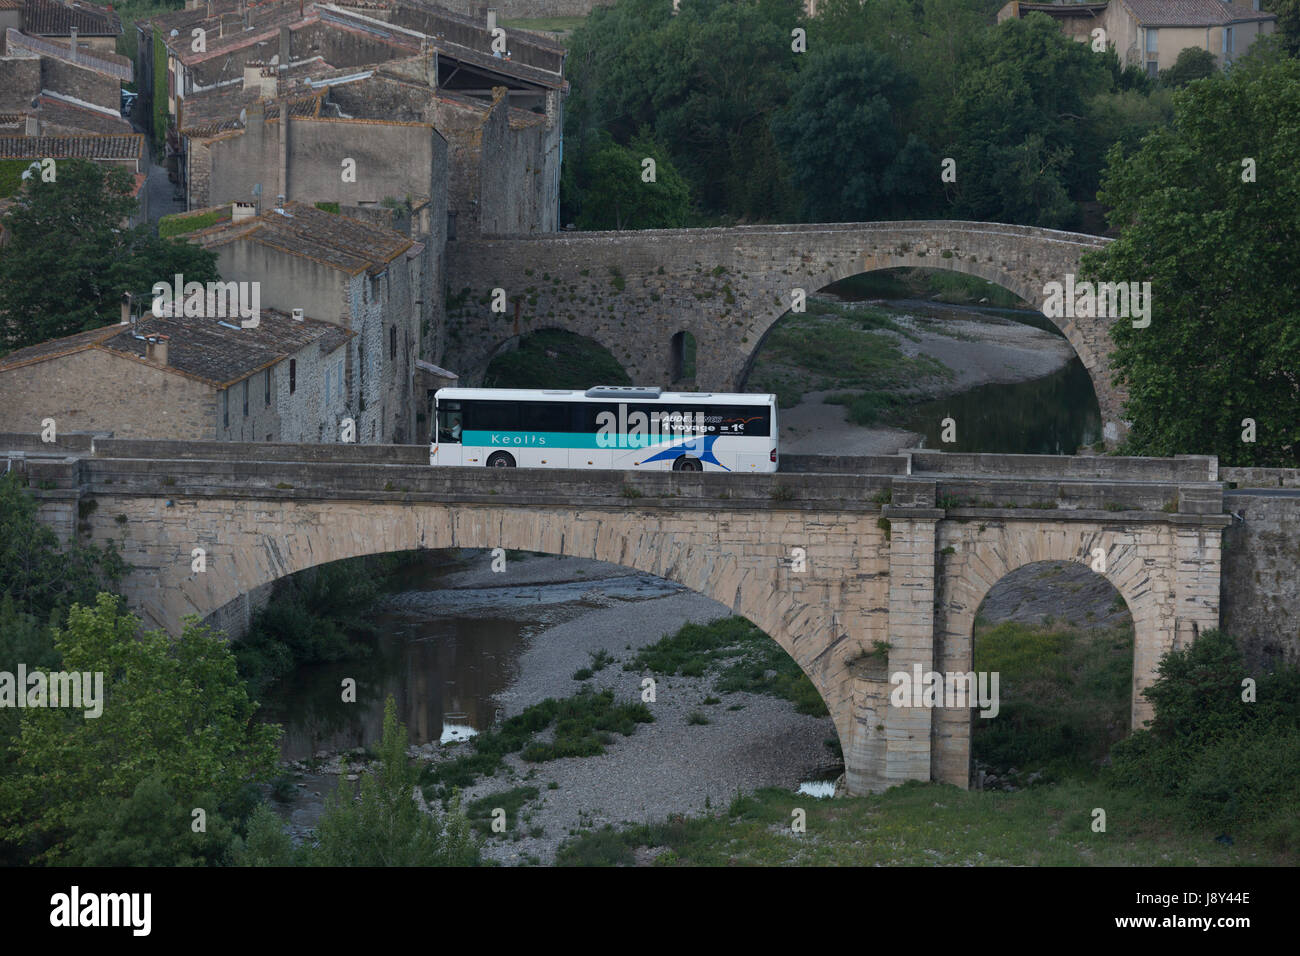 The early school bus crosses one of the bridges at the pretty French medieval walled village of Lagrasse on the River Orbieu, on 23rd May, 2017, in Lagrasse, Languedoc-Rousillon, south of France. Lagrasse is listed as one of France's most beautiful villages and lies on the famous Route 20 wine route in the Basses-Corbieres region dating to the 13th century. Stock Photo